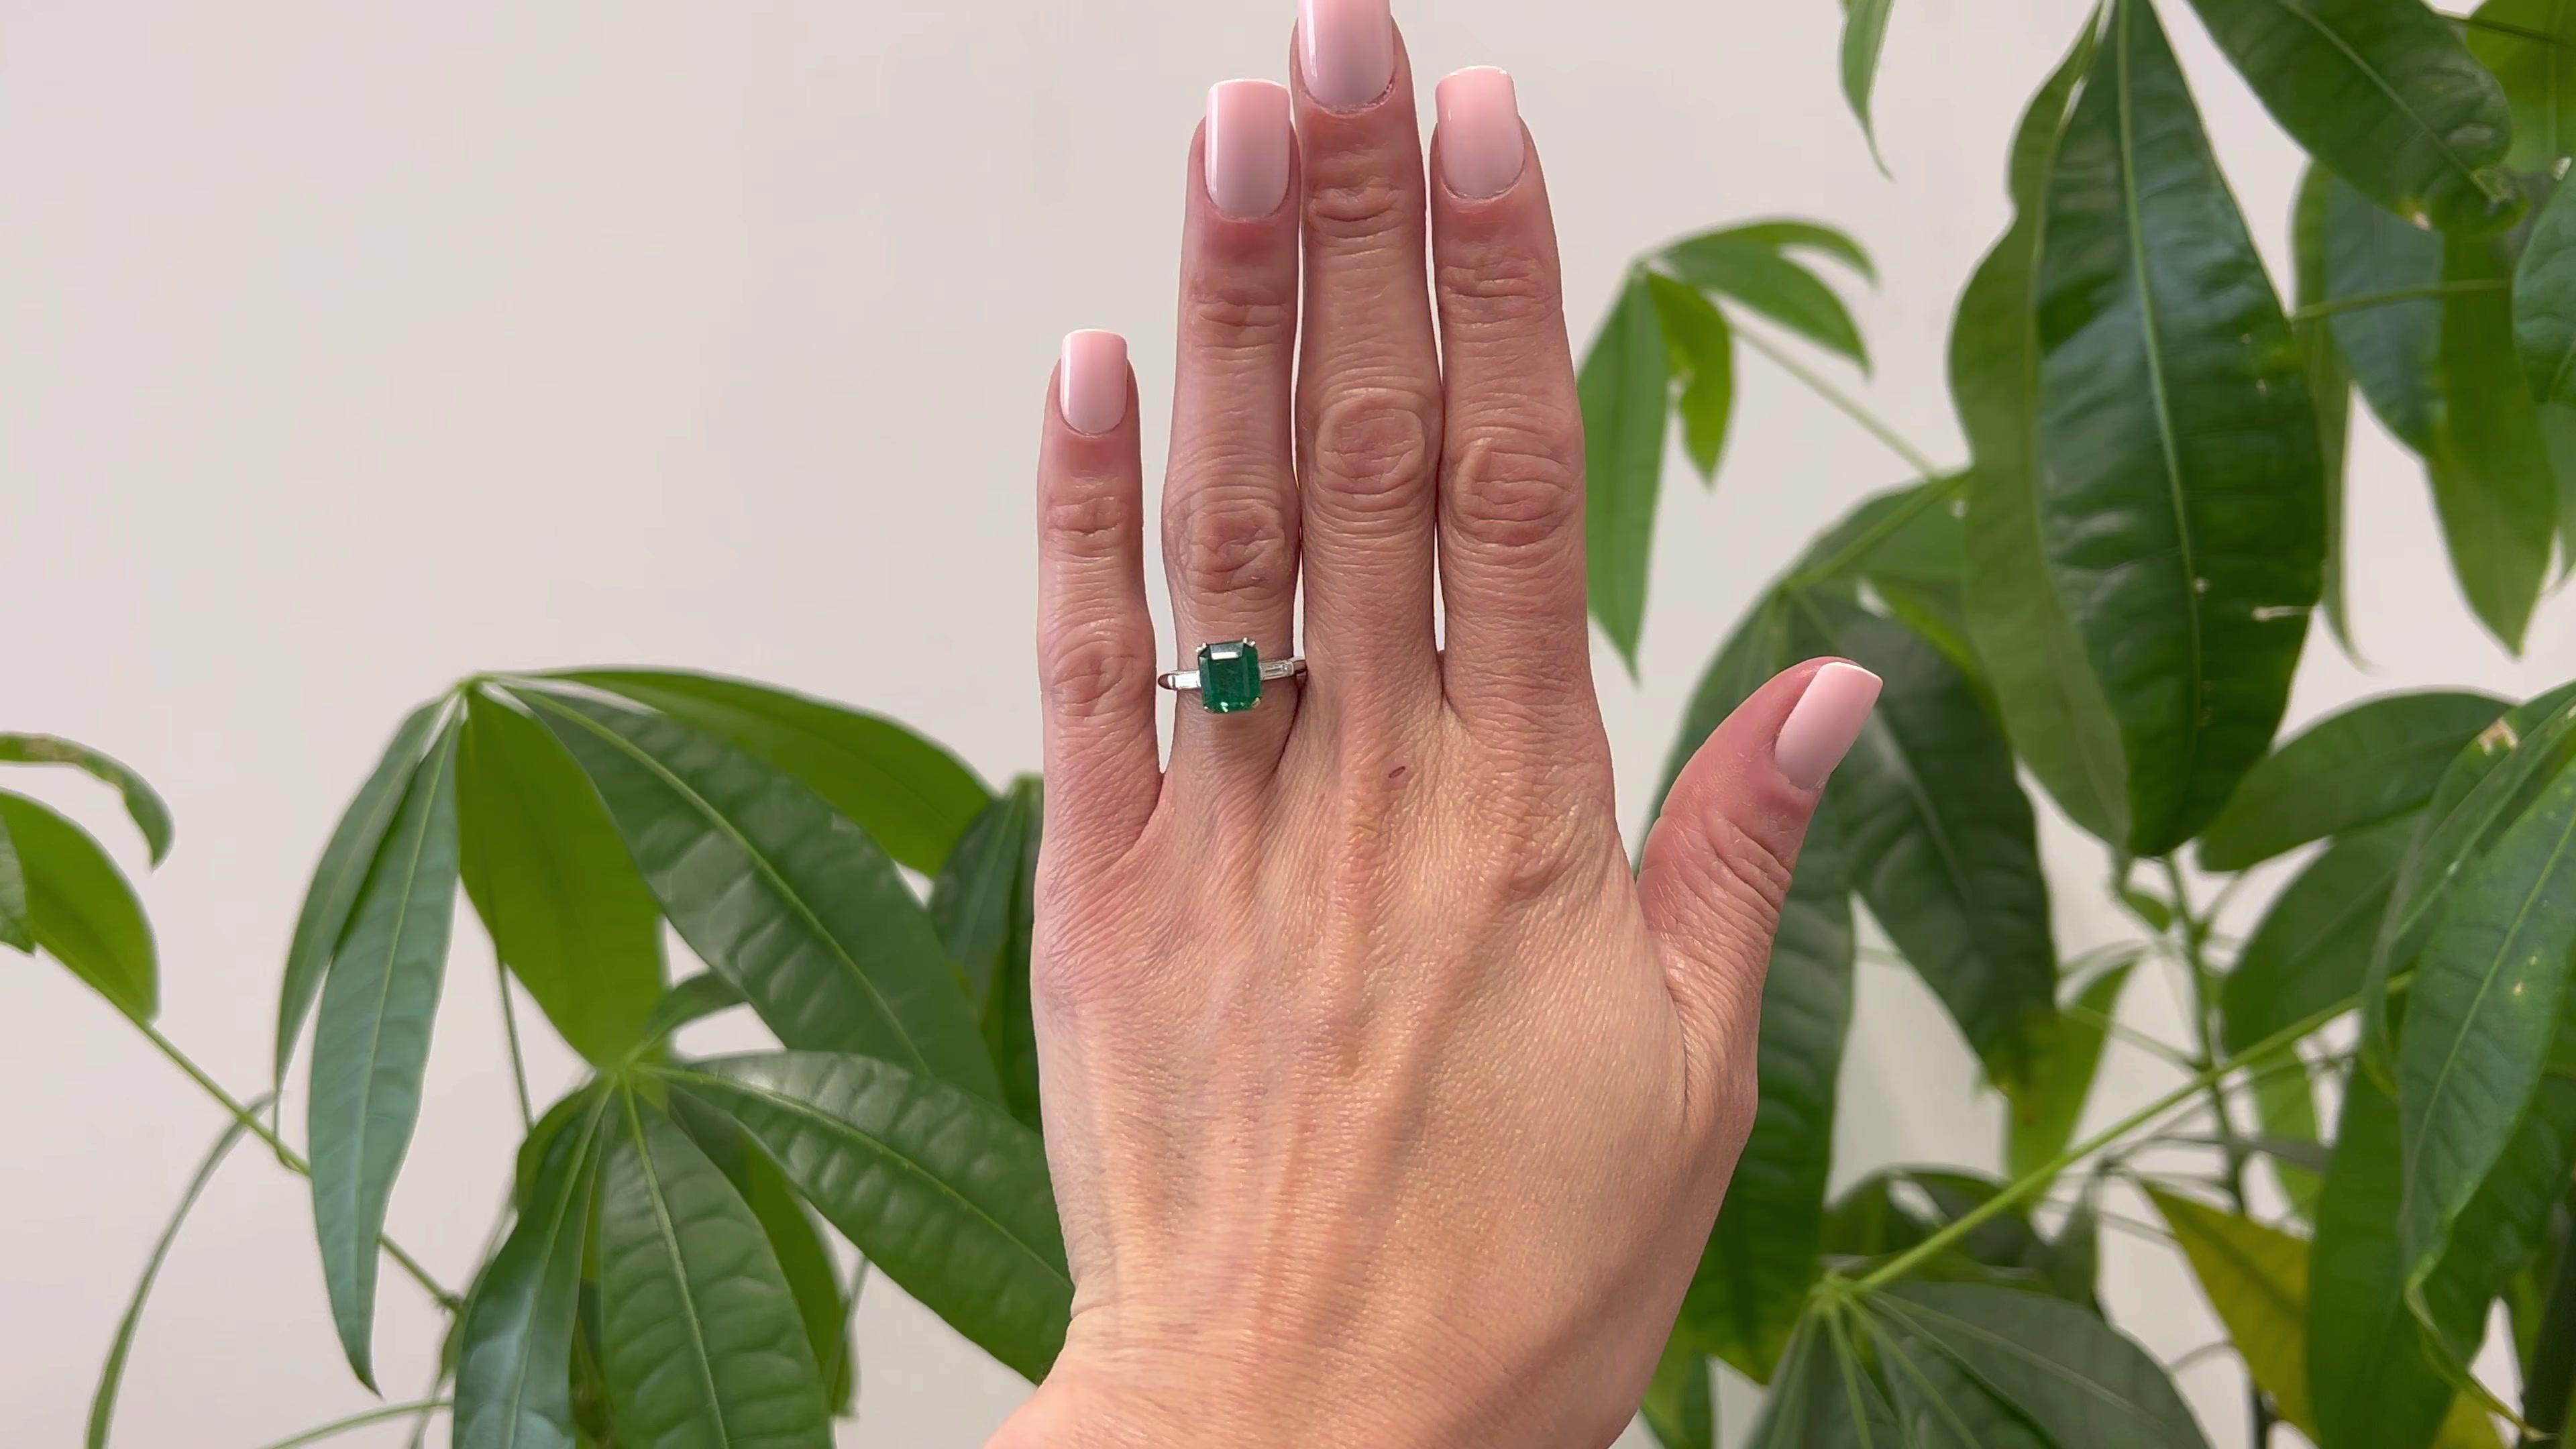 One Vintage GIA Zambian Emerald and Diamond Platinum Ring. Featuring one GIA octagonal step cut emerald weighing 2.75 carats, accompanied with GIA #2225988712 stating the emerald is of Zambian origin. Accented by two baguette cut diamonds with a